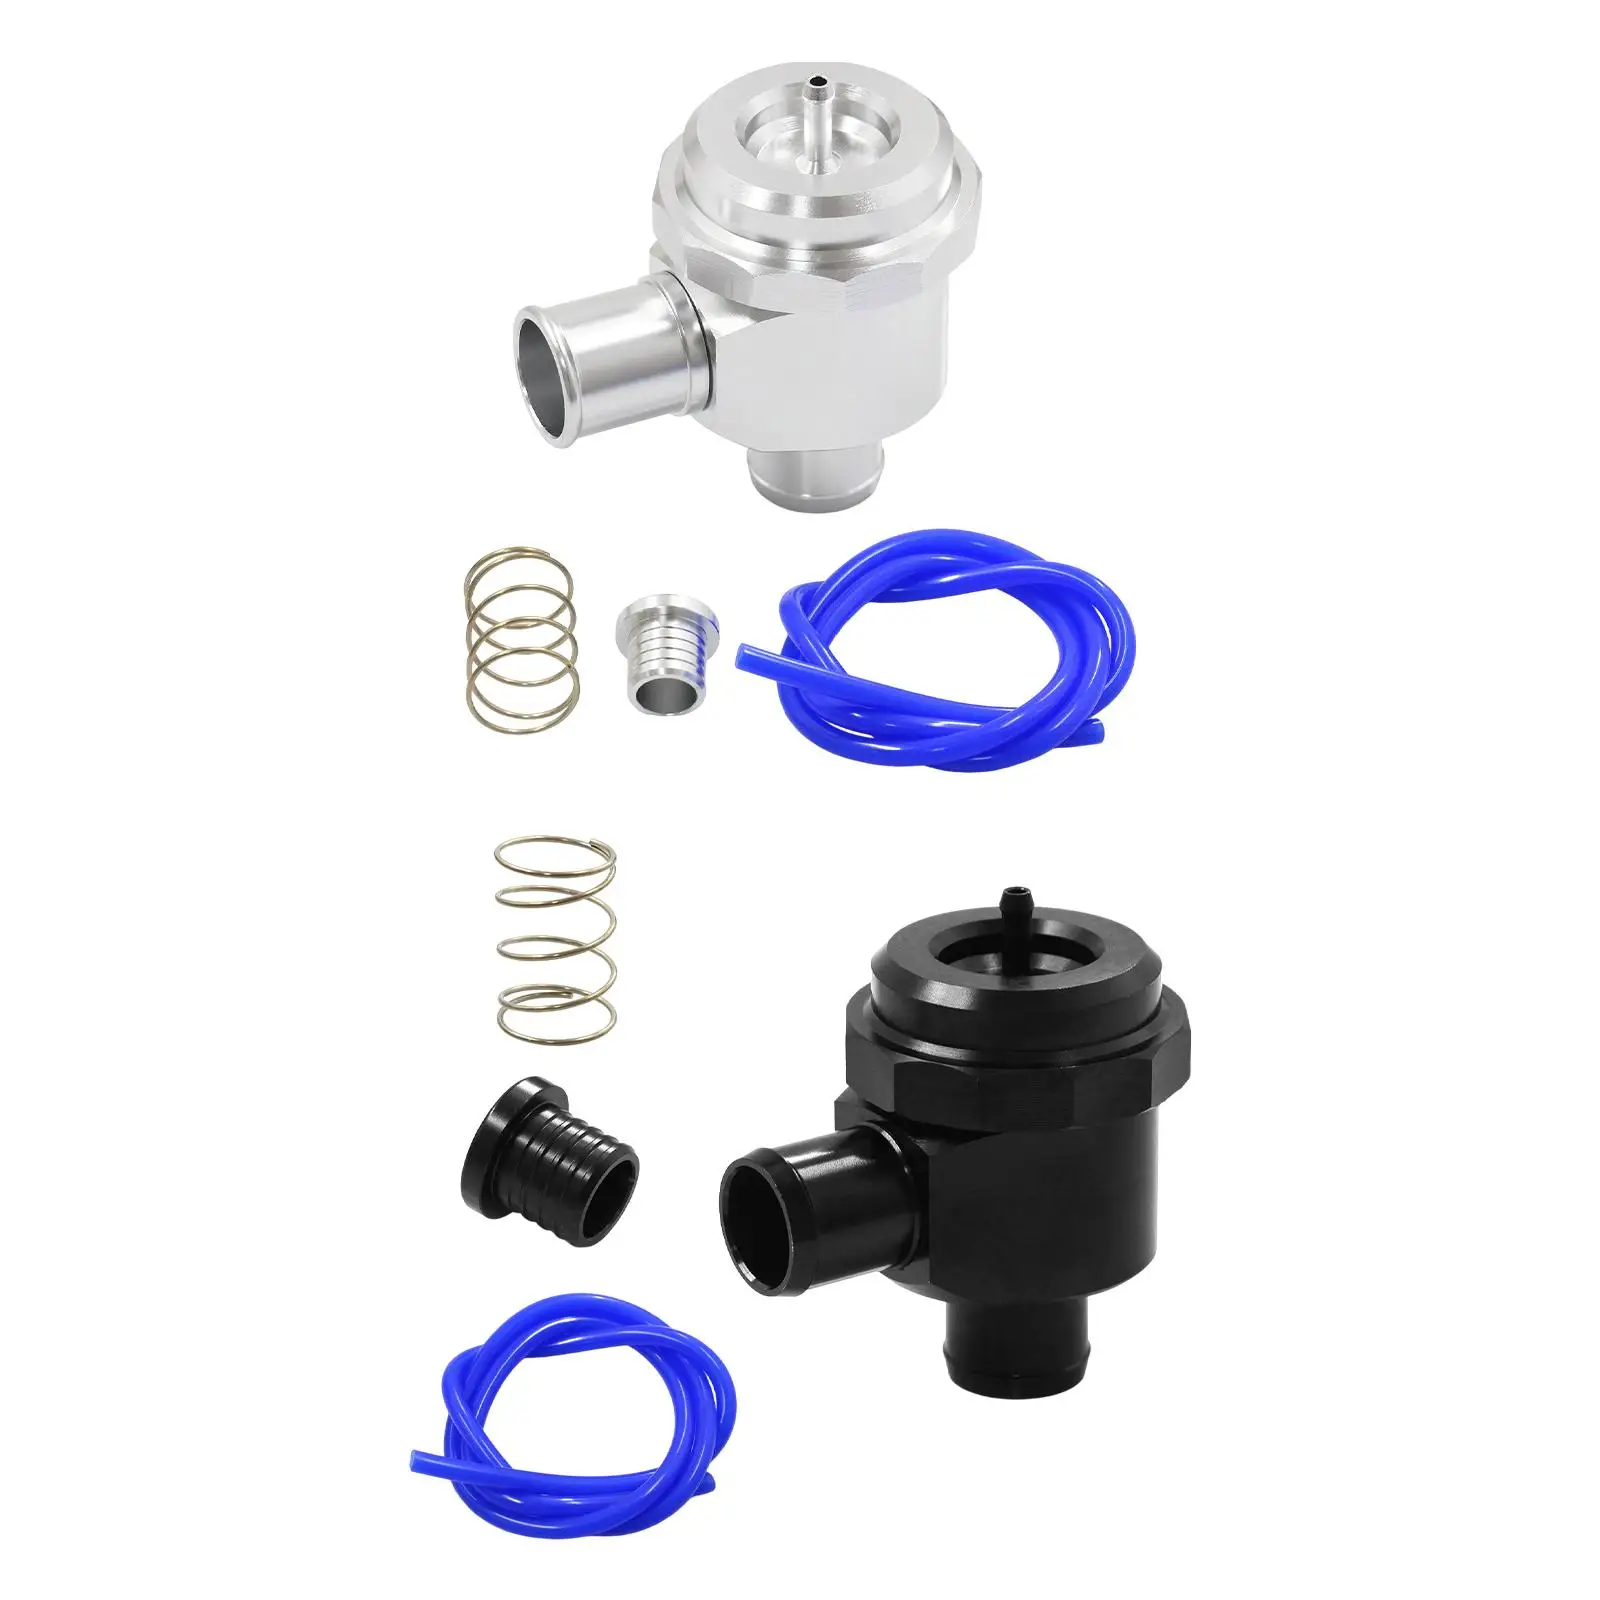 Diverter Blow Off Valve Spare Parts Heavy Duty High Performance Multifunction Durable Professional for Car Accessories